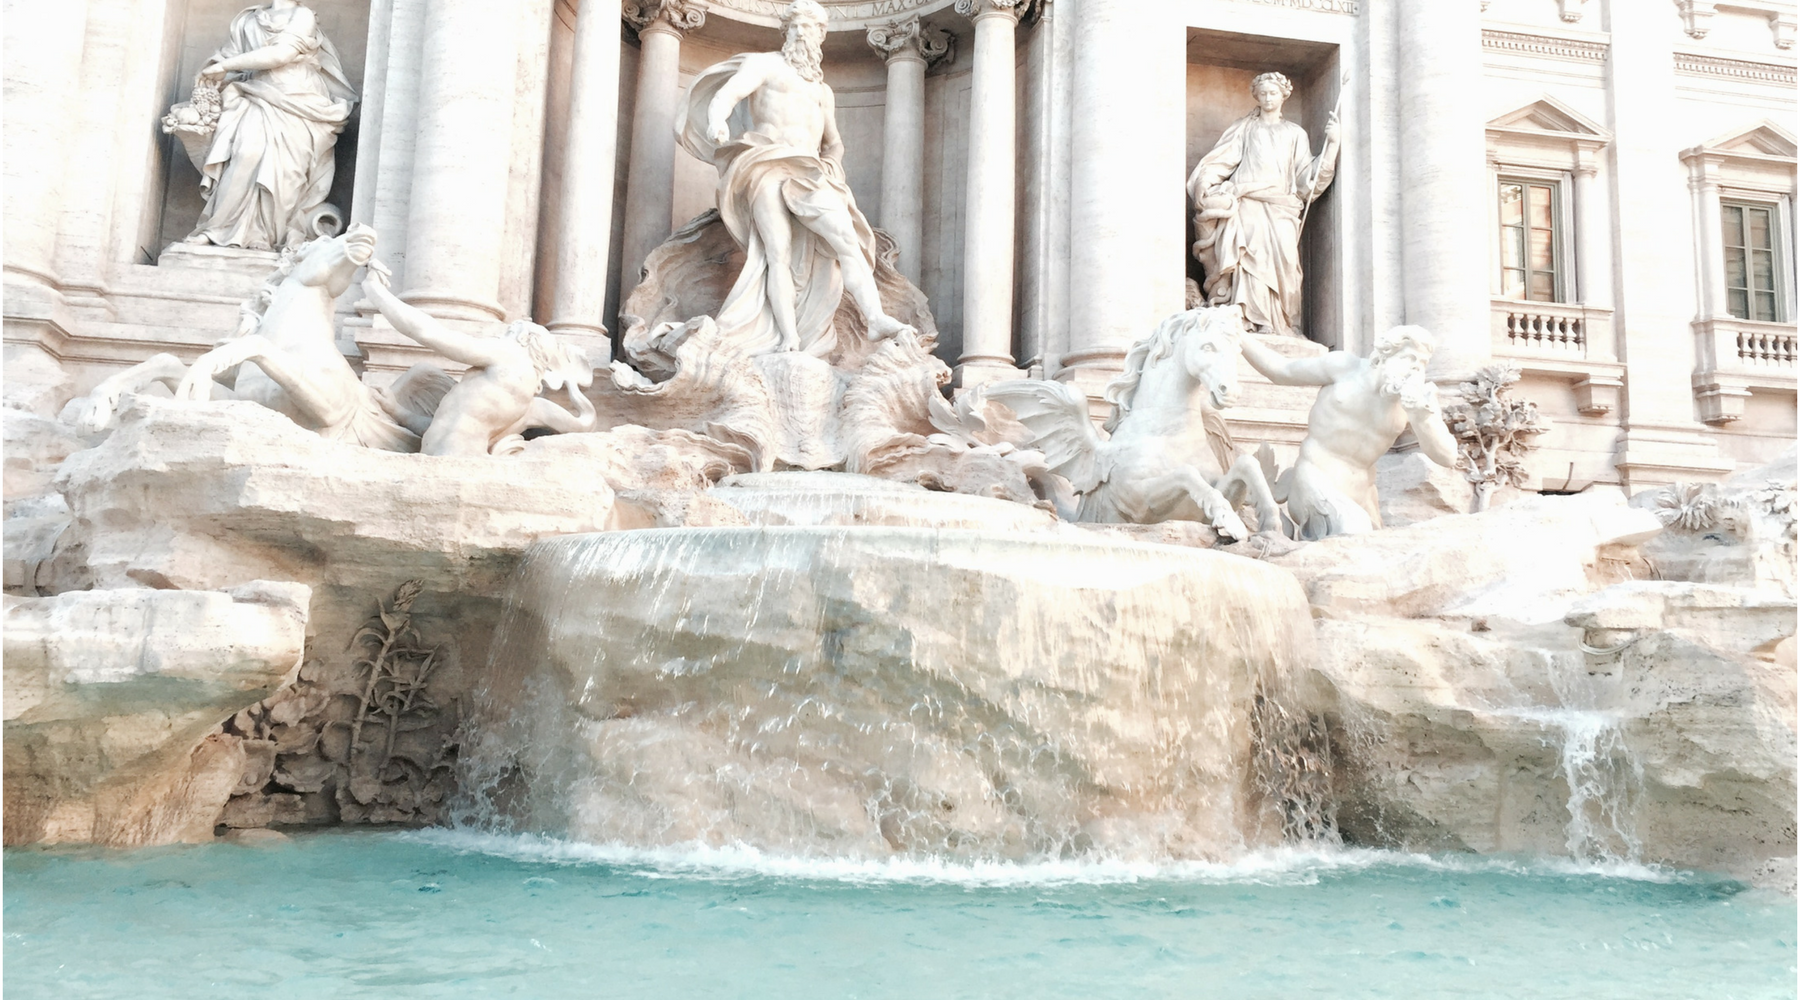 24 Hours in Rome with UrbanUndercover - Trevi Fountain